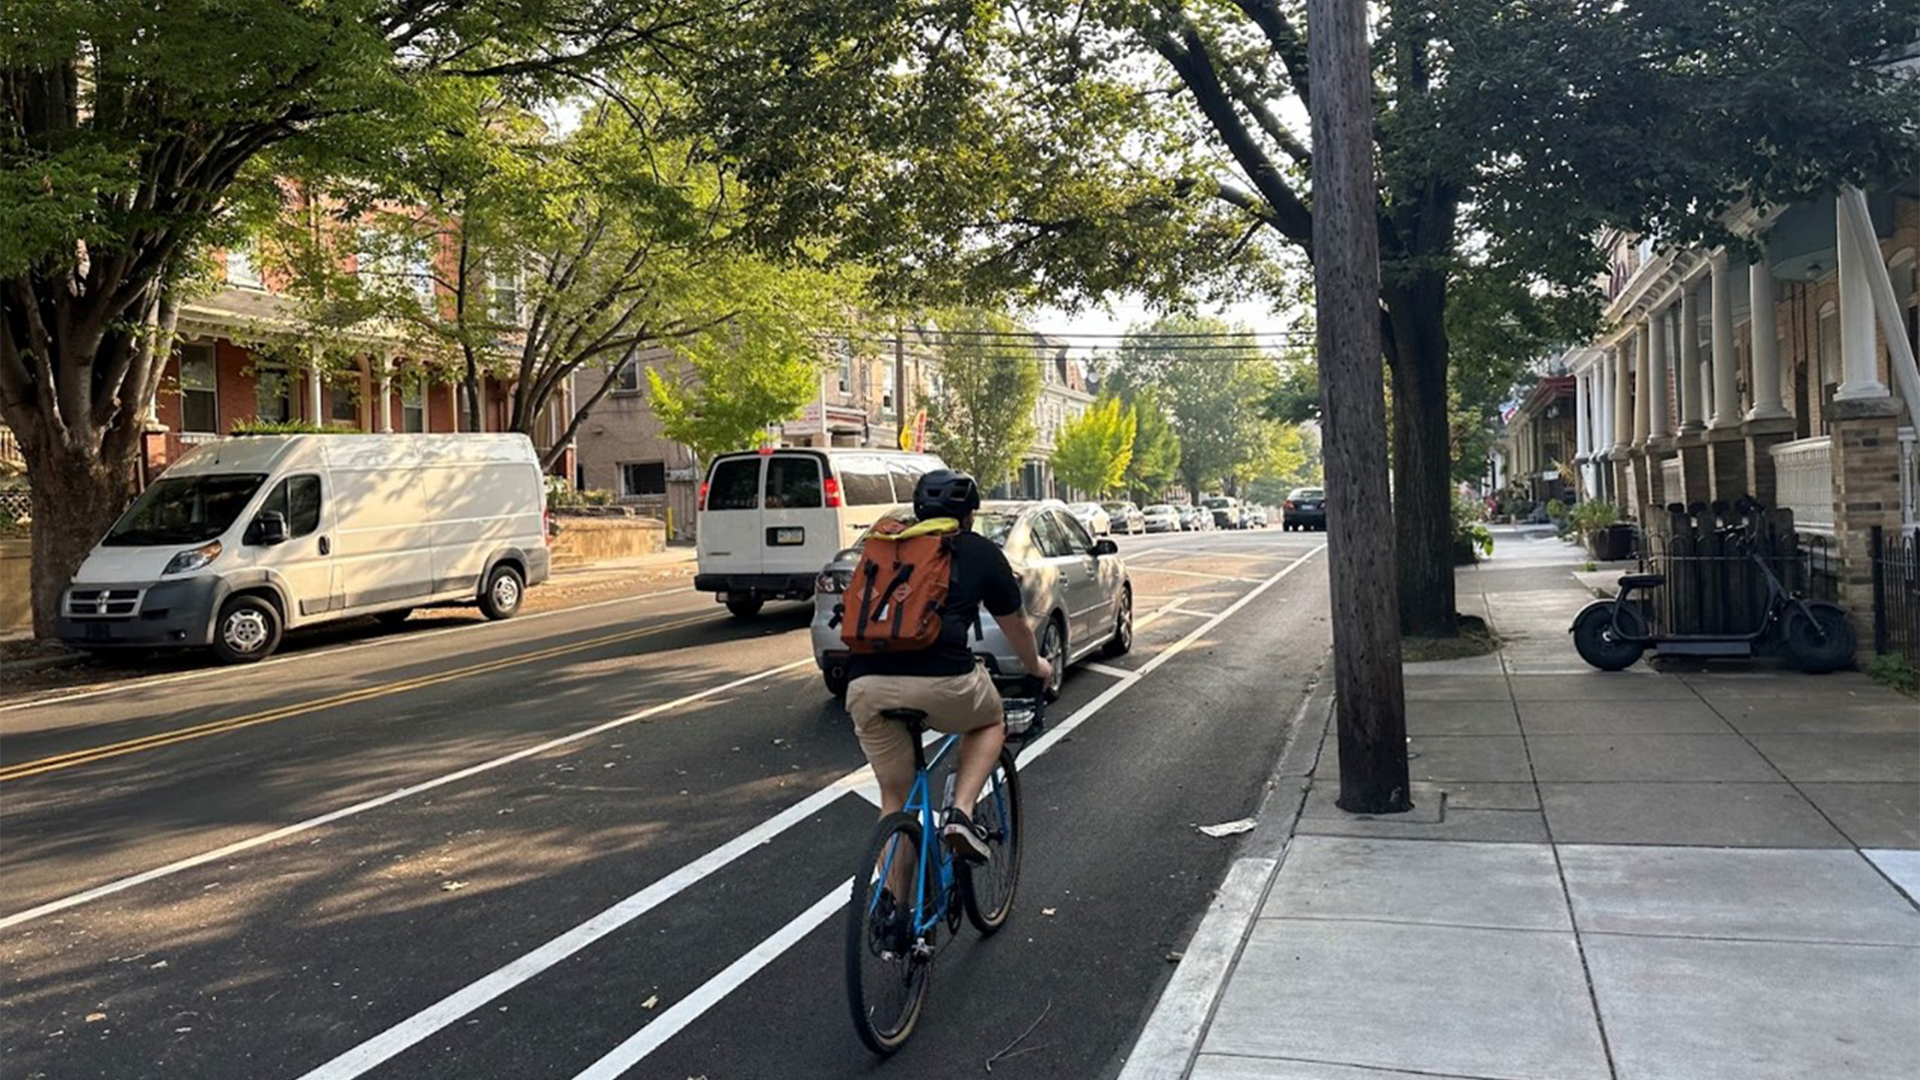 Person riding a bike in bike lane with trees and cars in the background